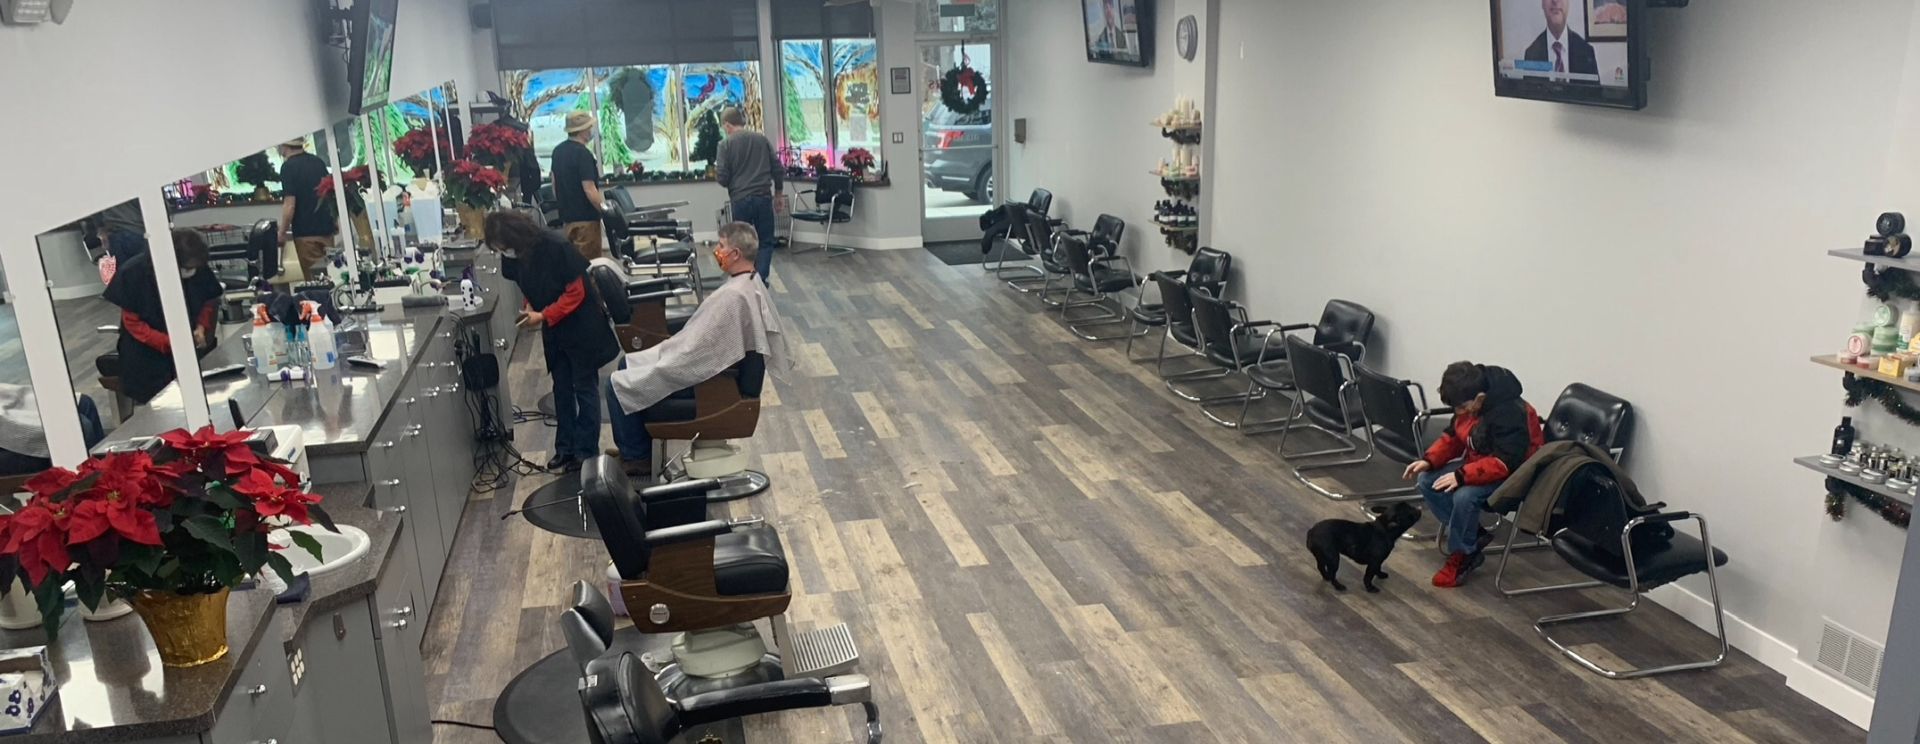 Cherry Hill Barber Shop Main Area with Stylists in Dearborn, Michigan.